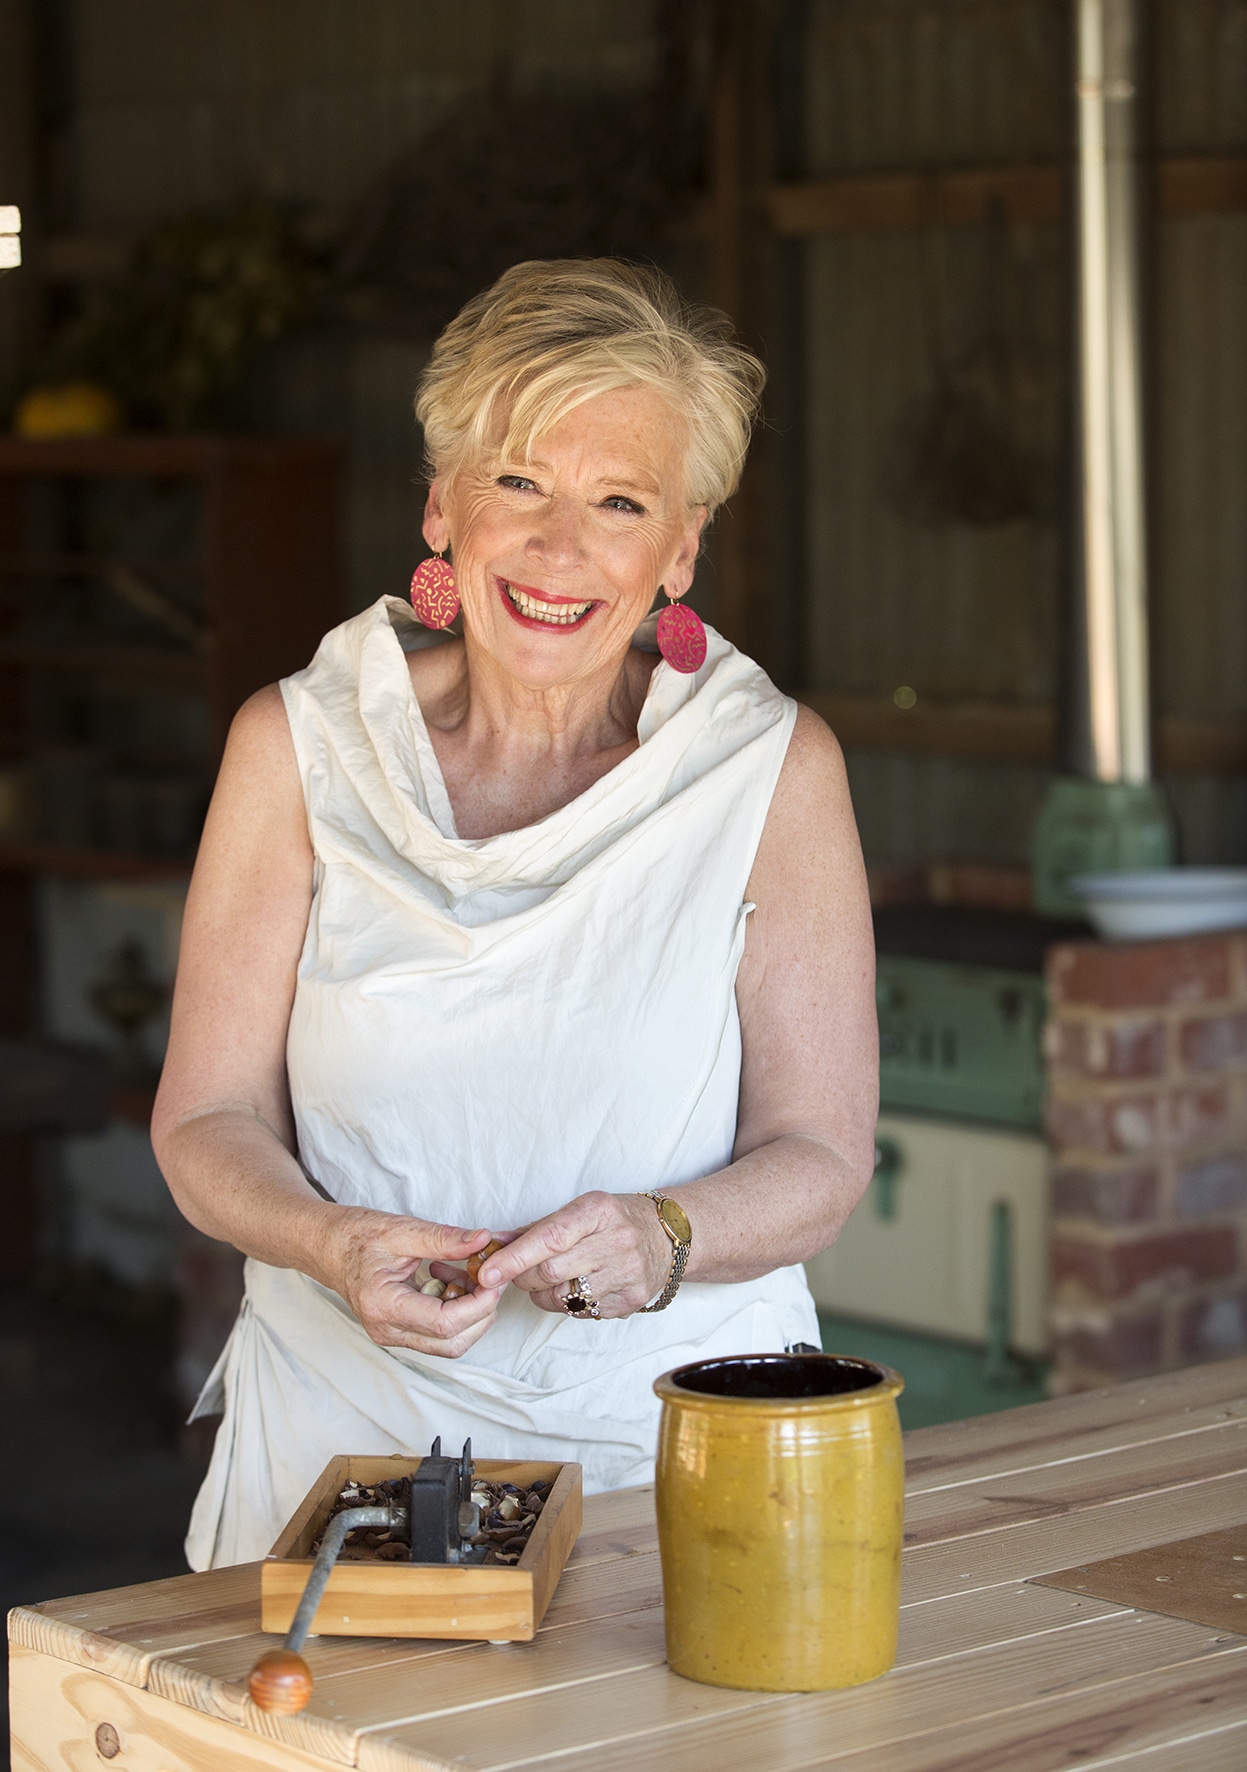 Australian food and TV celebrity Maggie Beer AO is seen shelling nuts and smiling at the camera